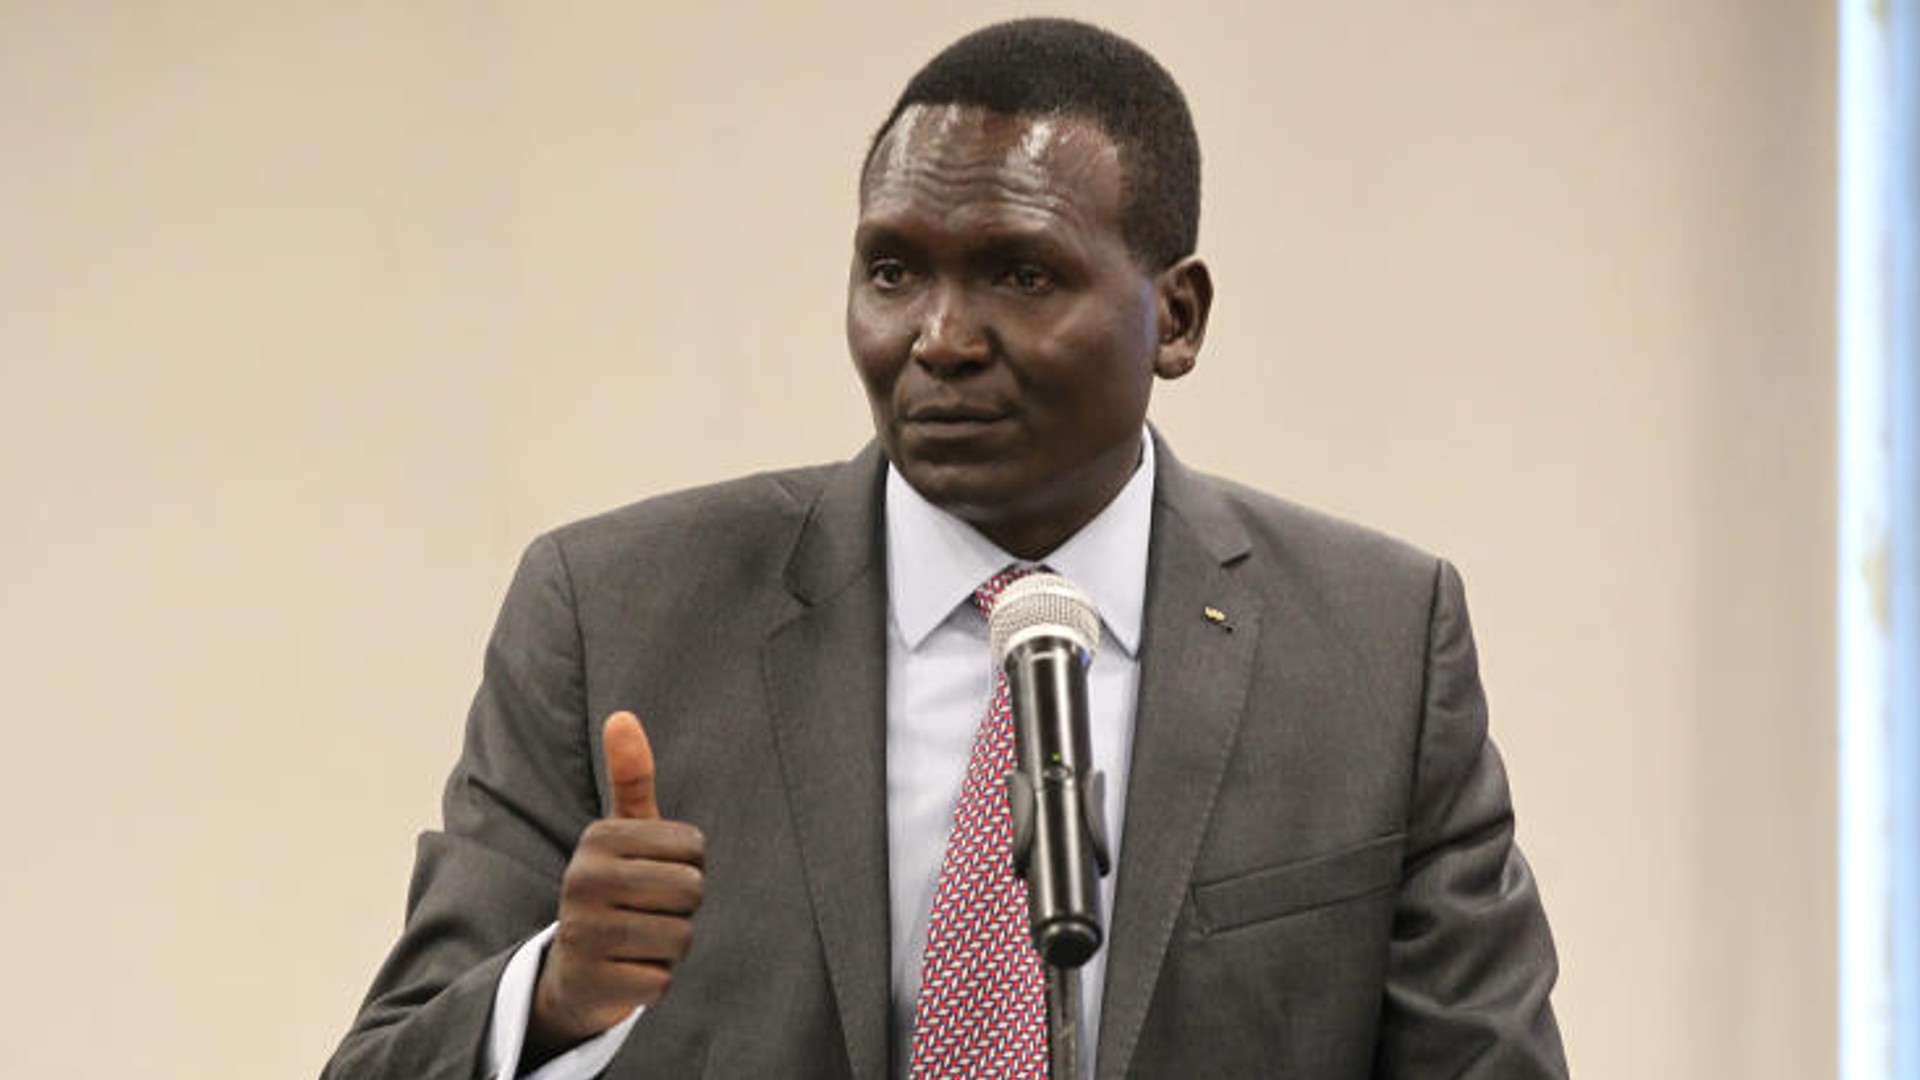 What is Paul Tergat's net worth, salary and brand endorsements?